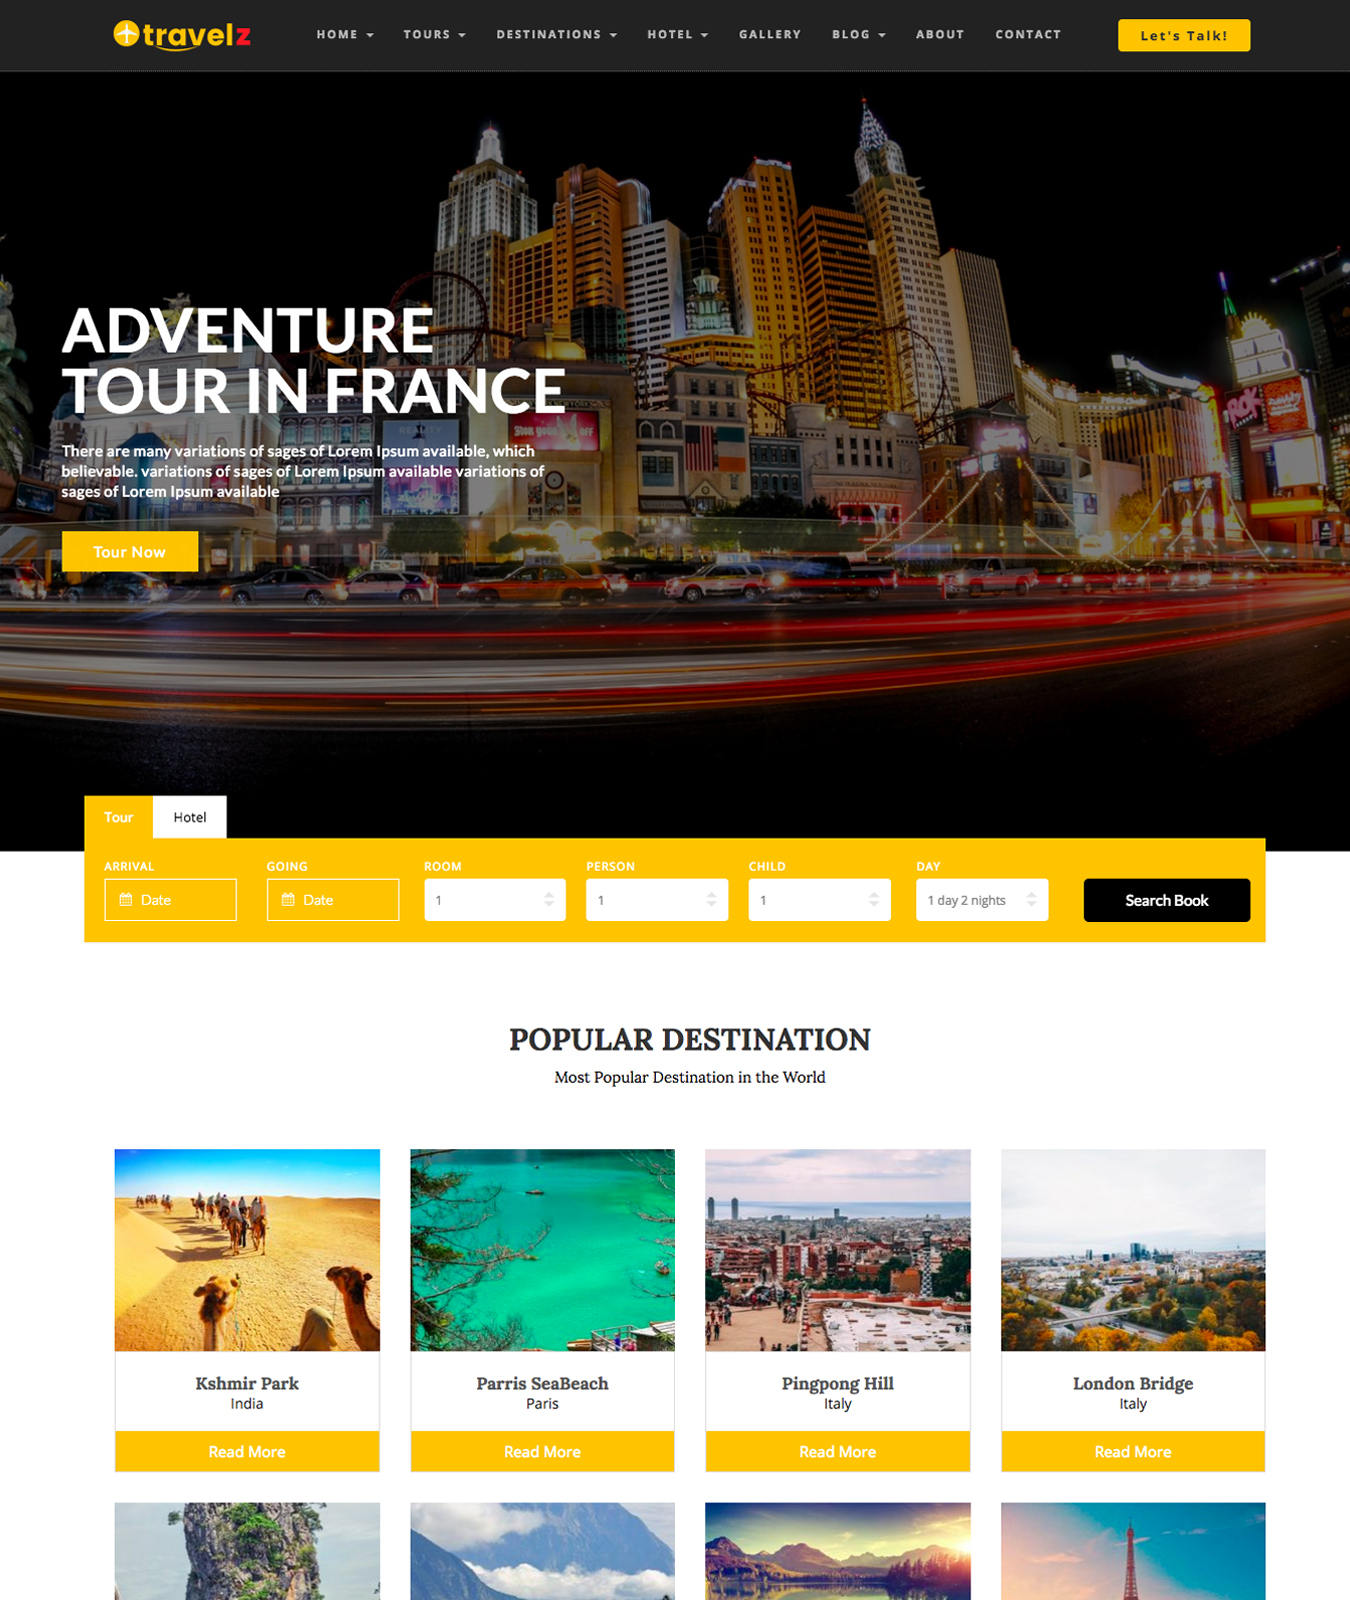 Travelz home page six